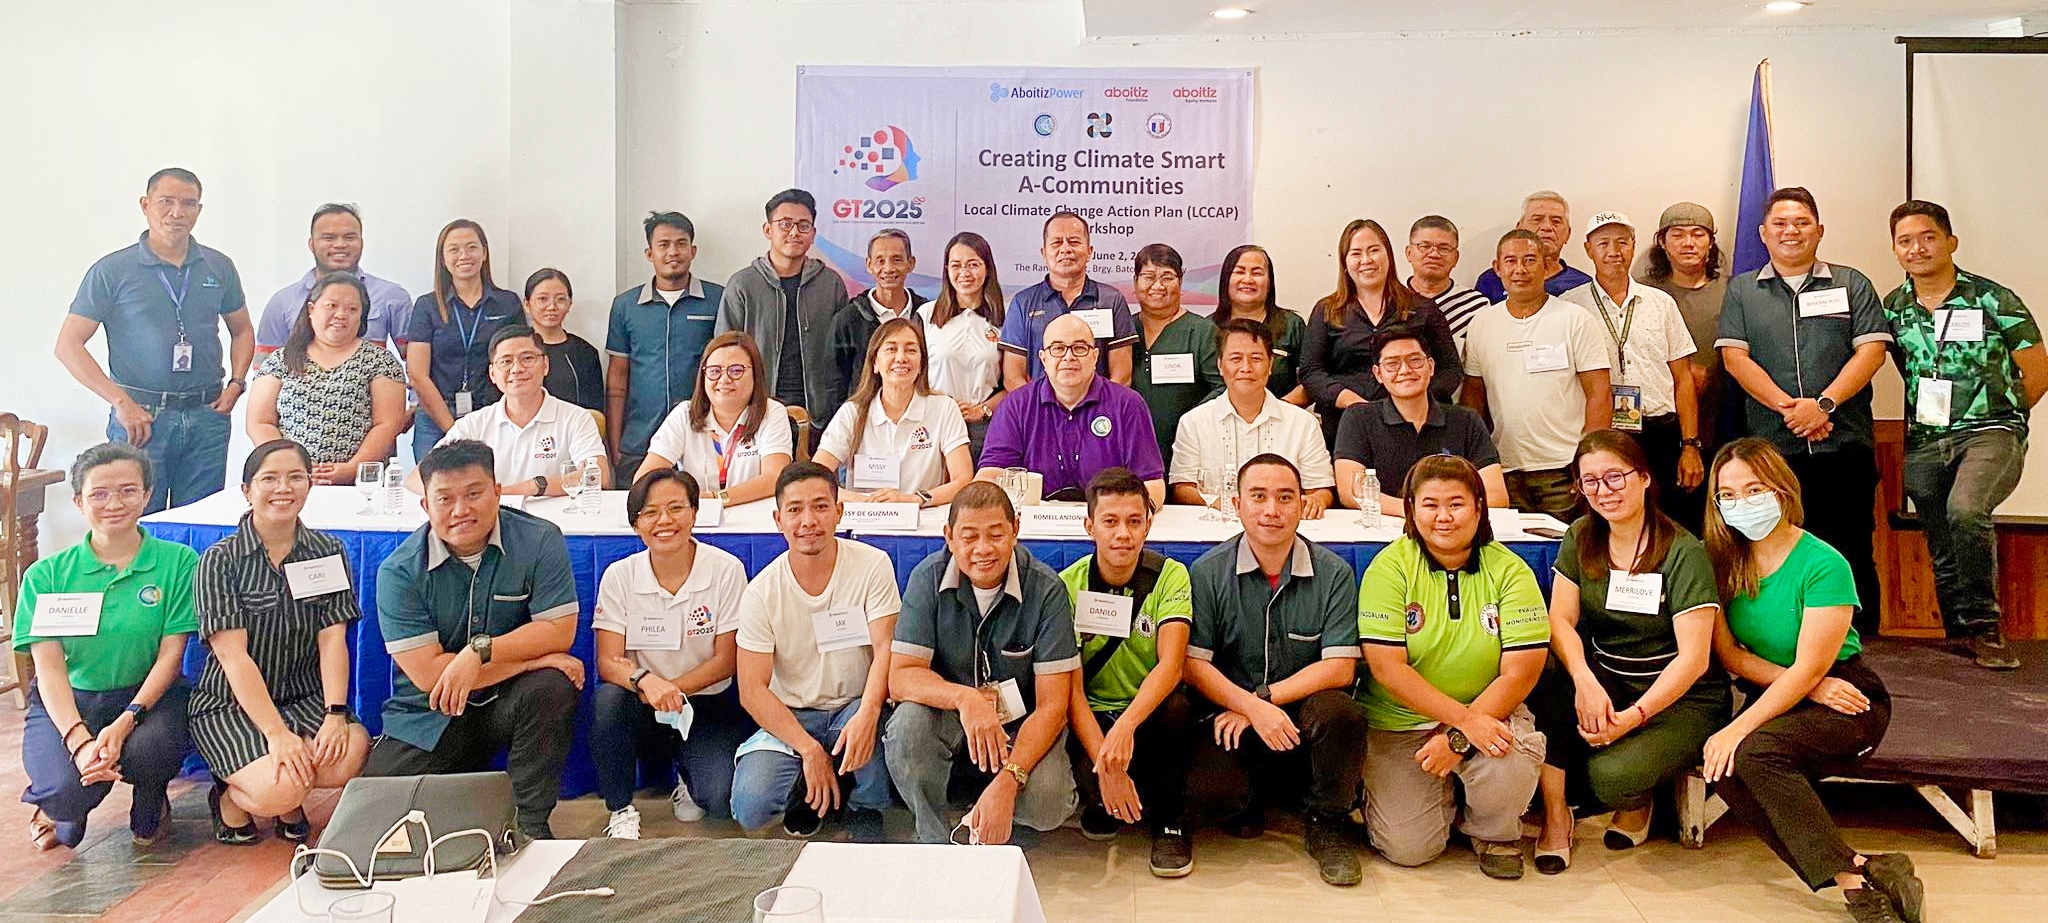 Aboitiz Group links with CCC to build climate-resilient communities in Toledo, Cebu